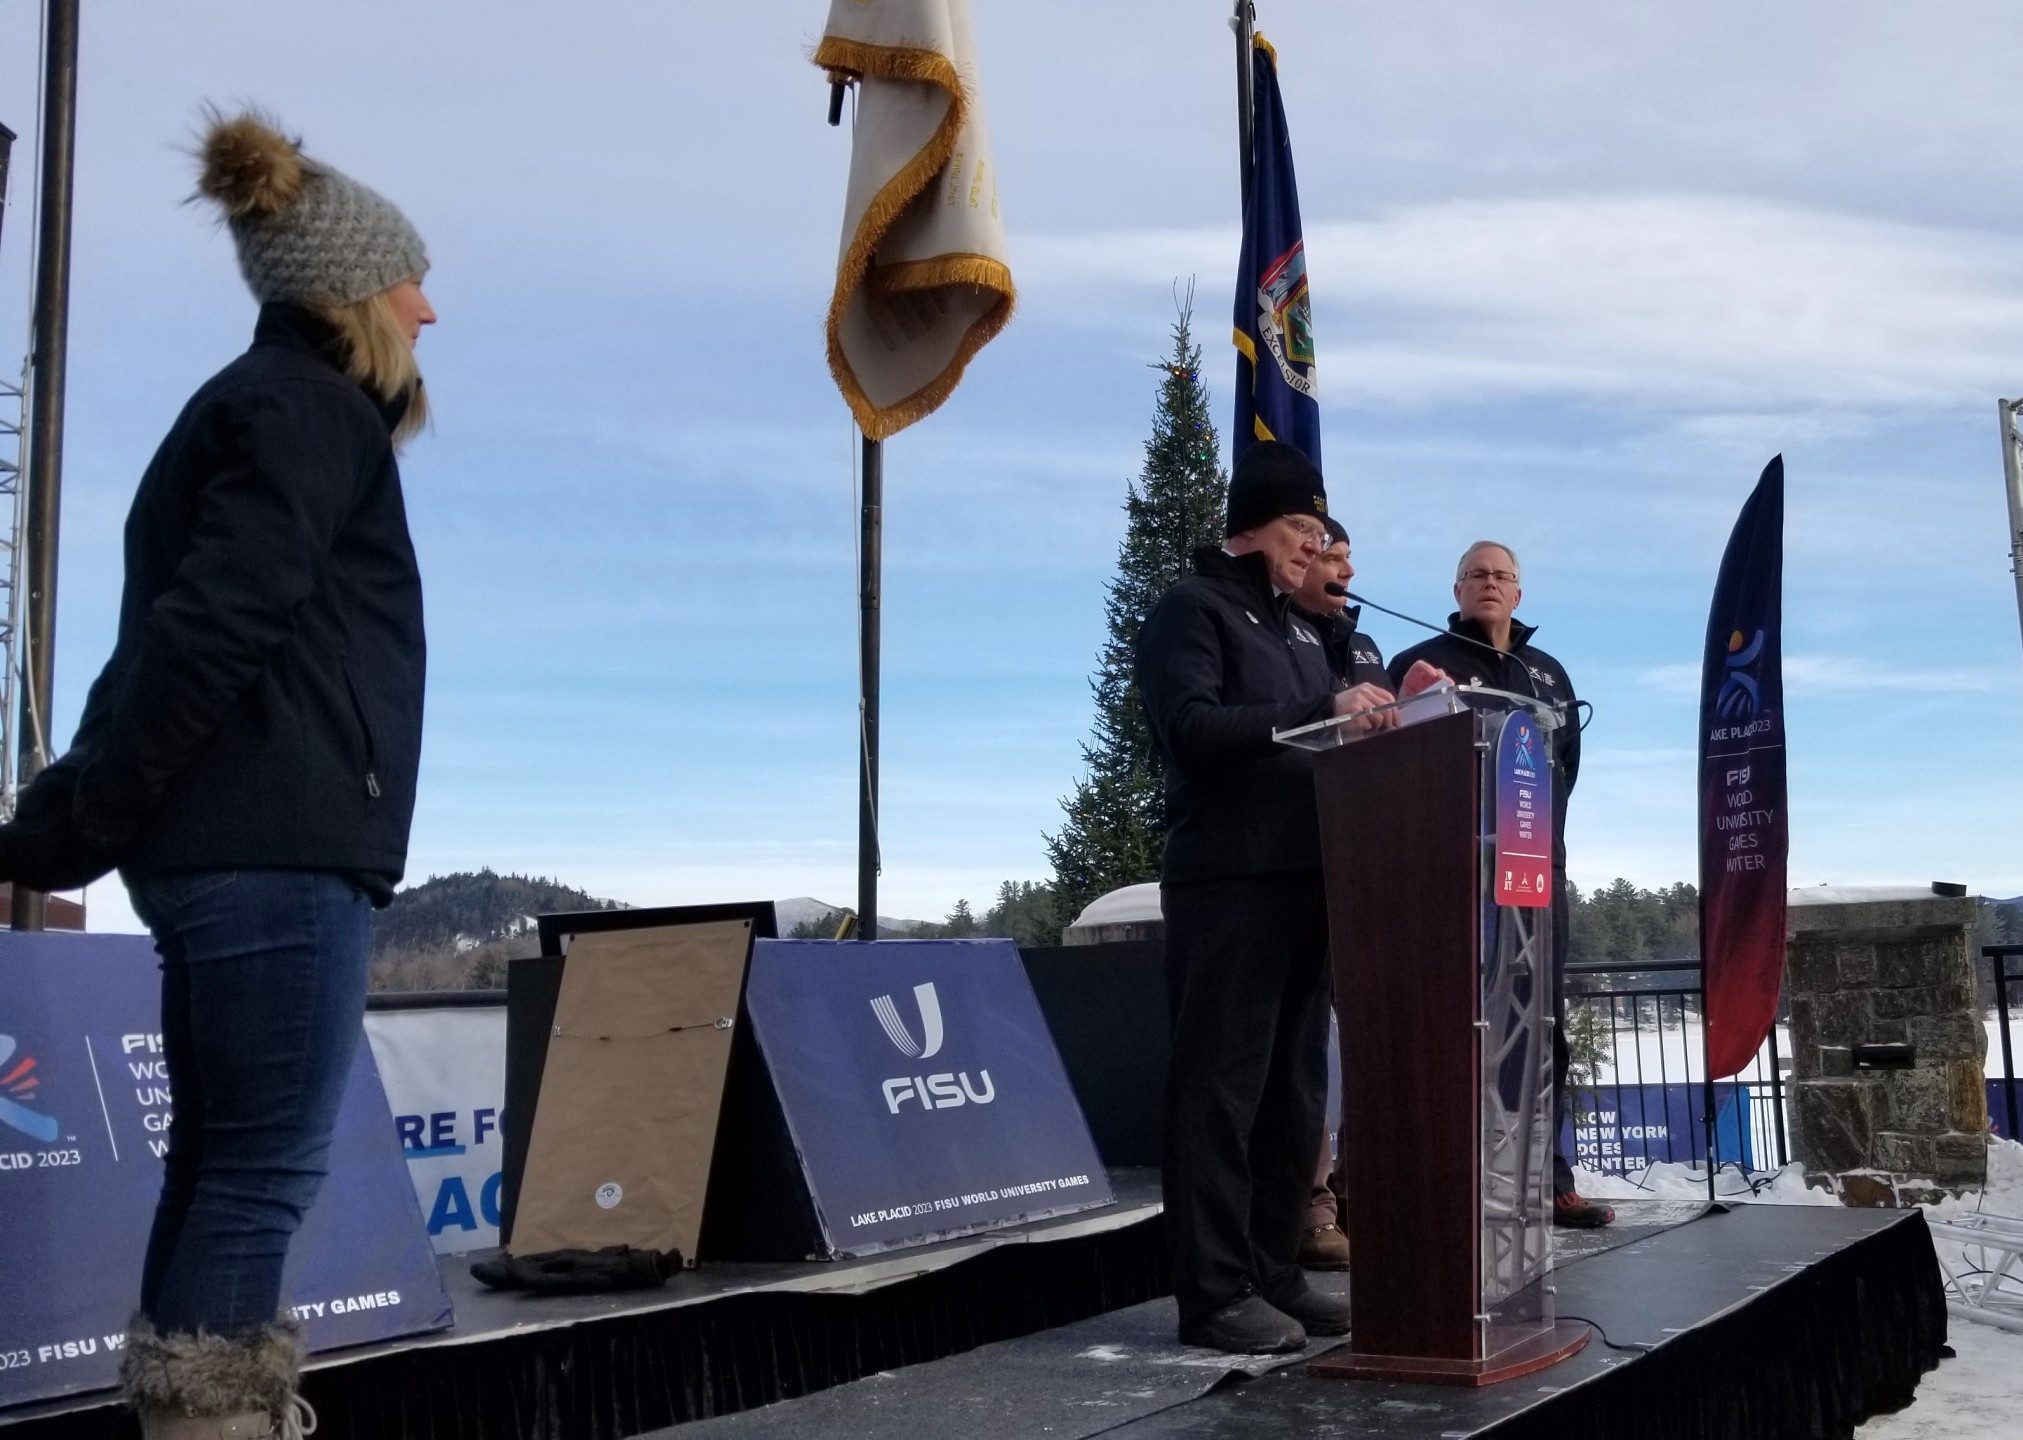 Lake Placid Mayor Art Devlin said the Games will deliver a strong legacy for the region ©Lake Placid 2023